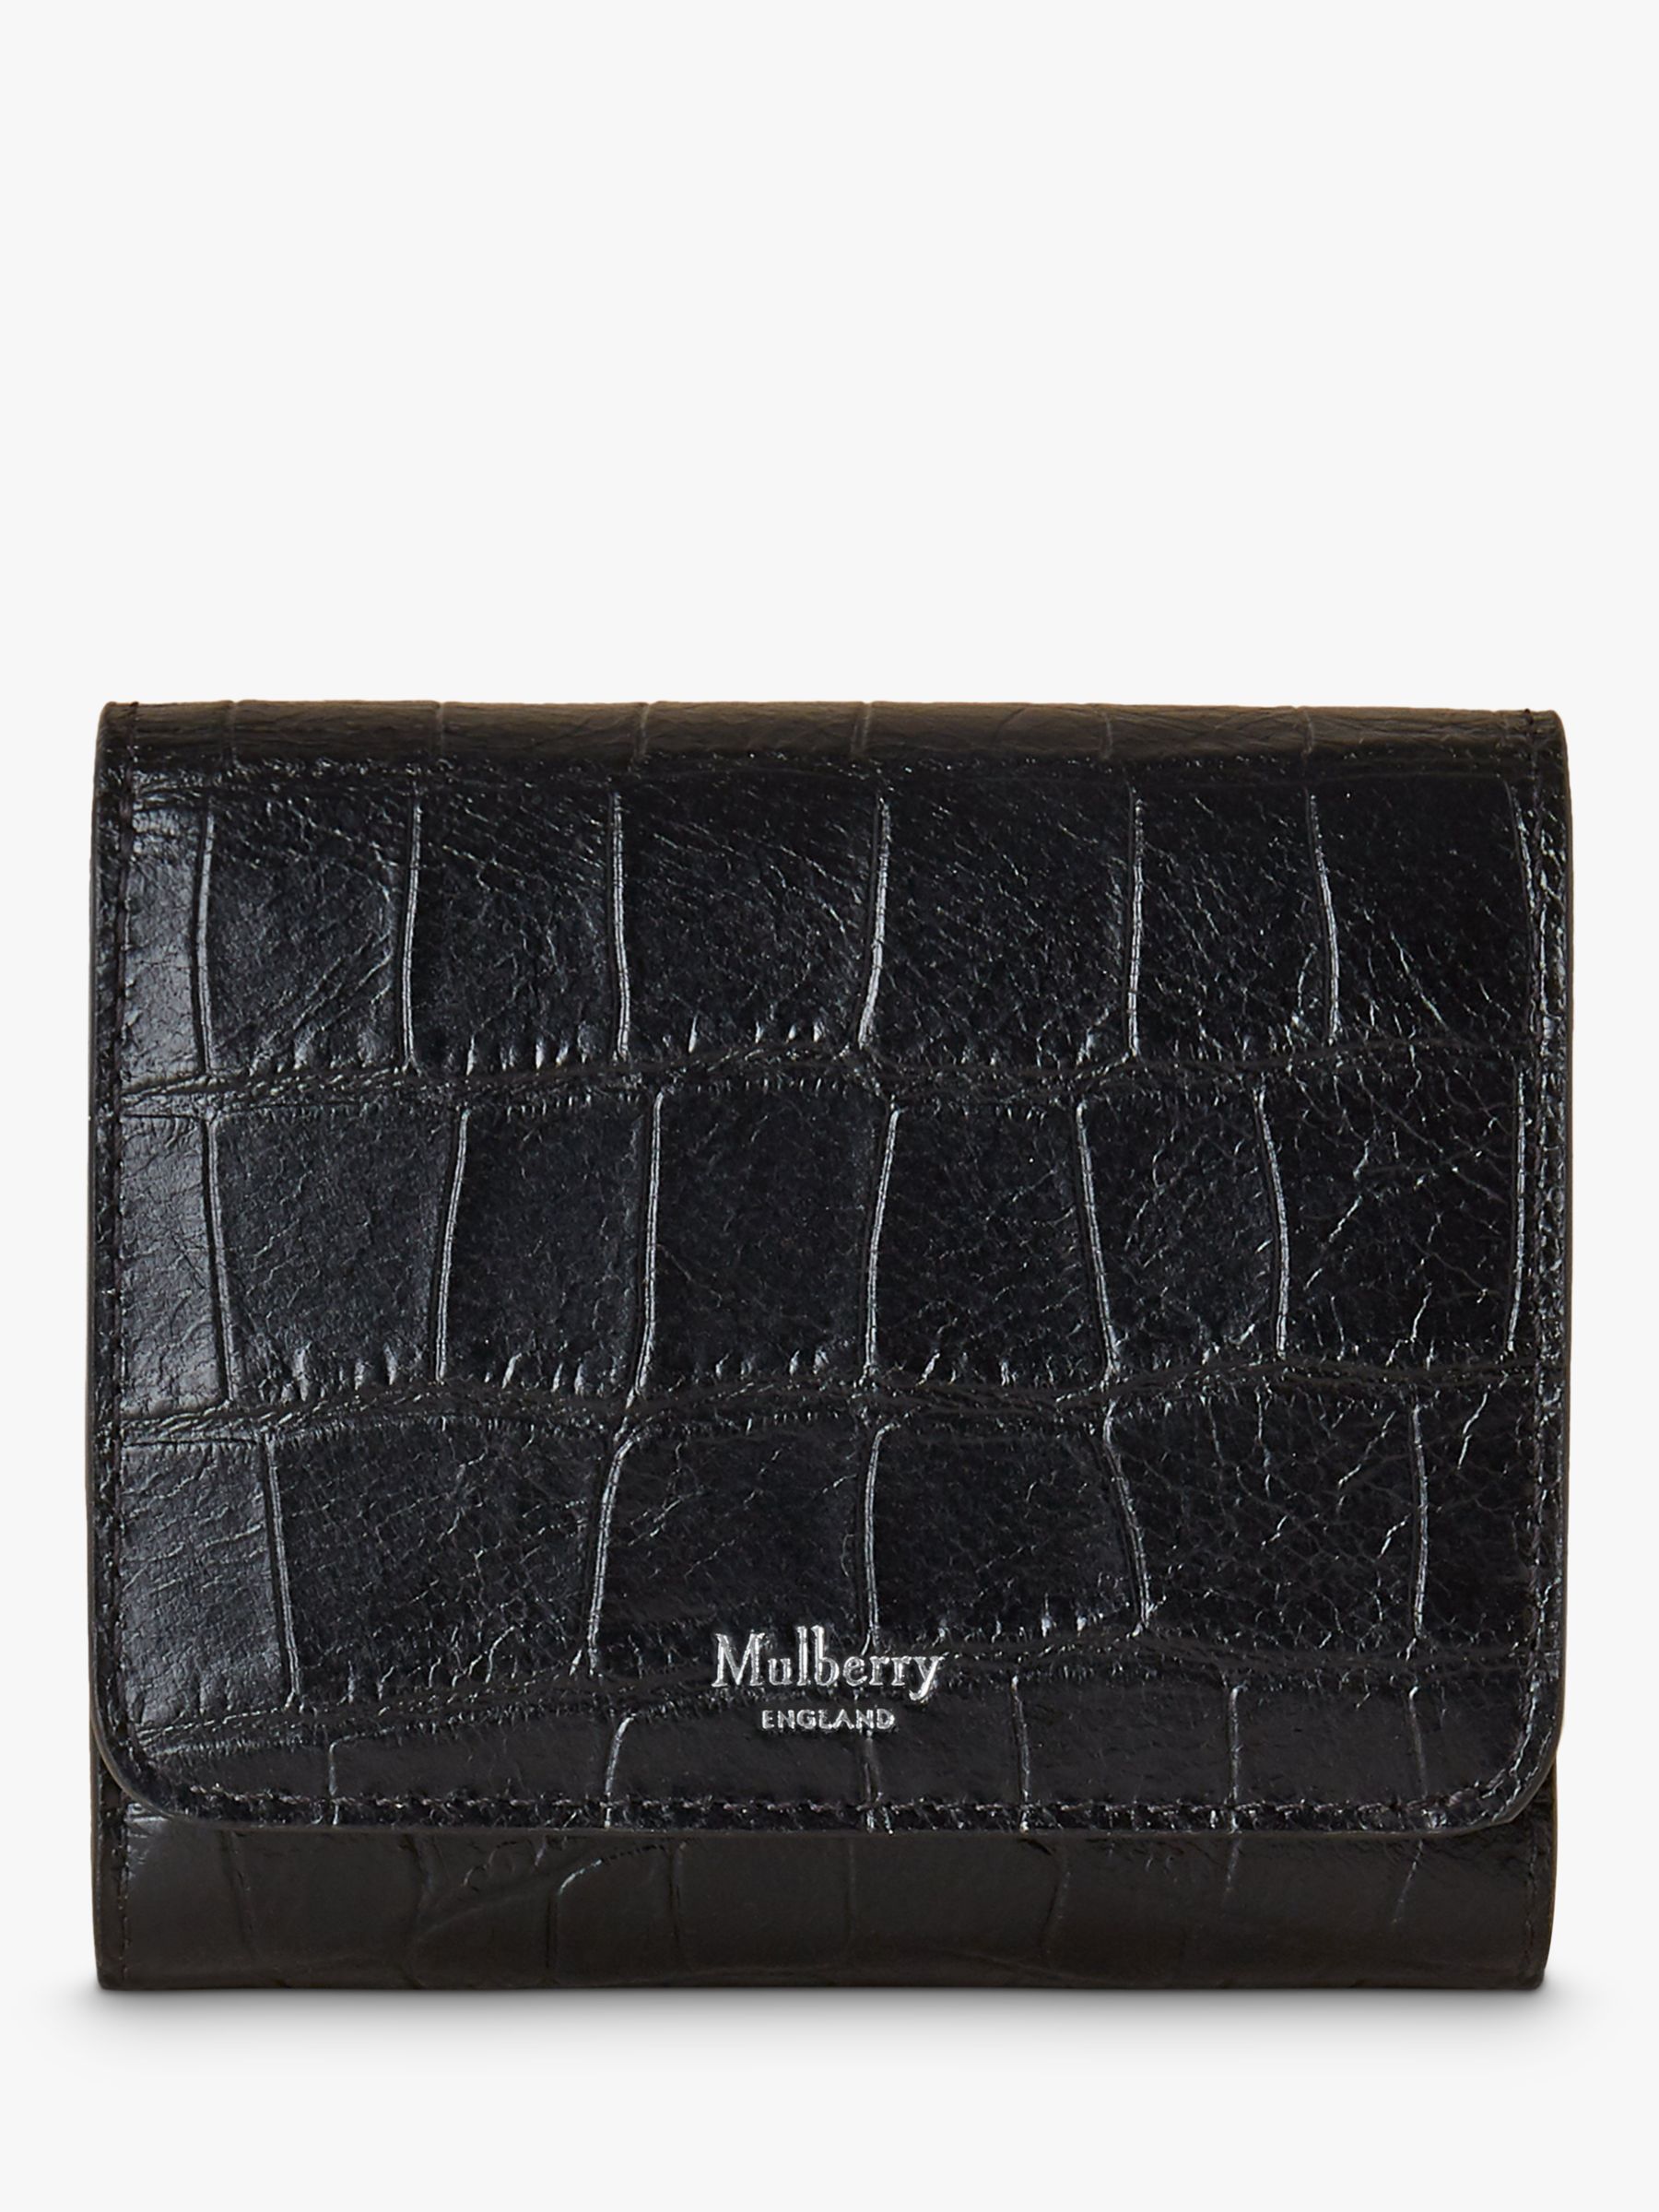 Mulberry Small Continental Soft Printed Croc Leather French Purse, Black at John Lewis & Partners